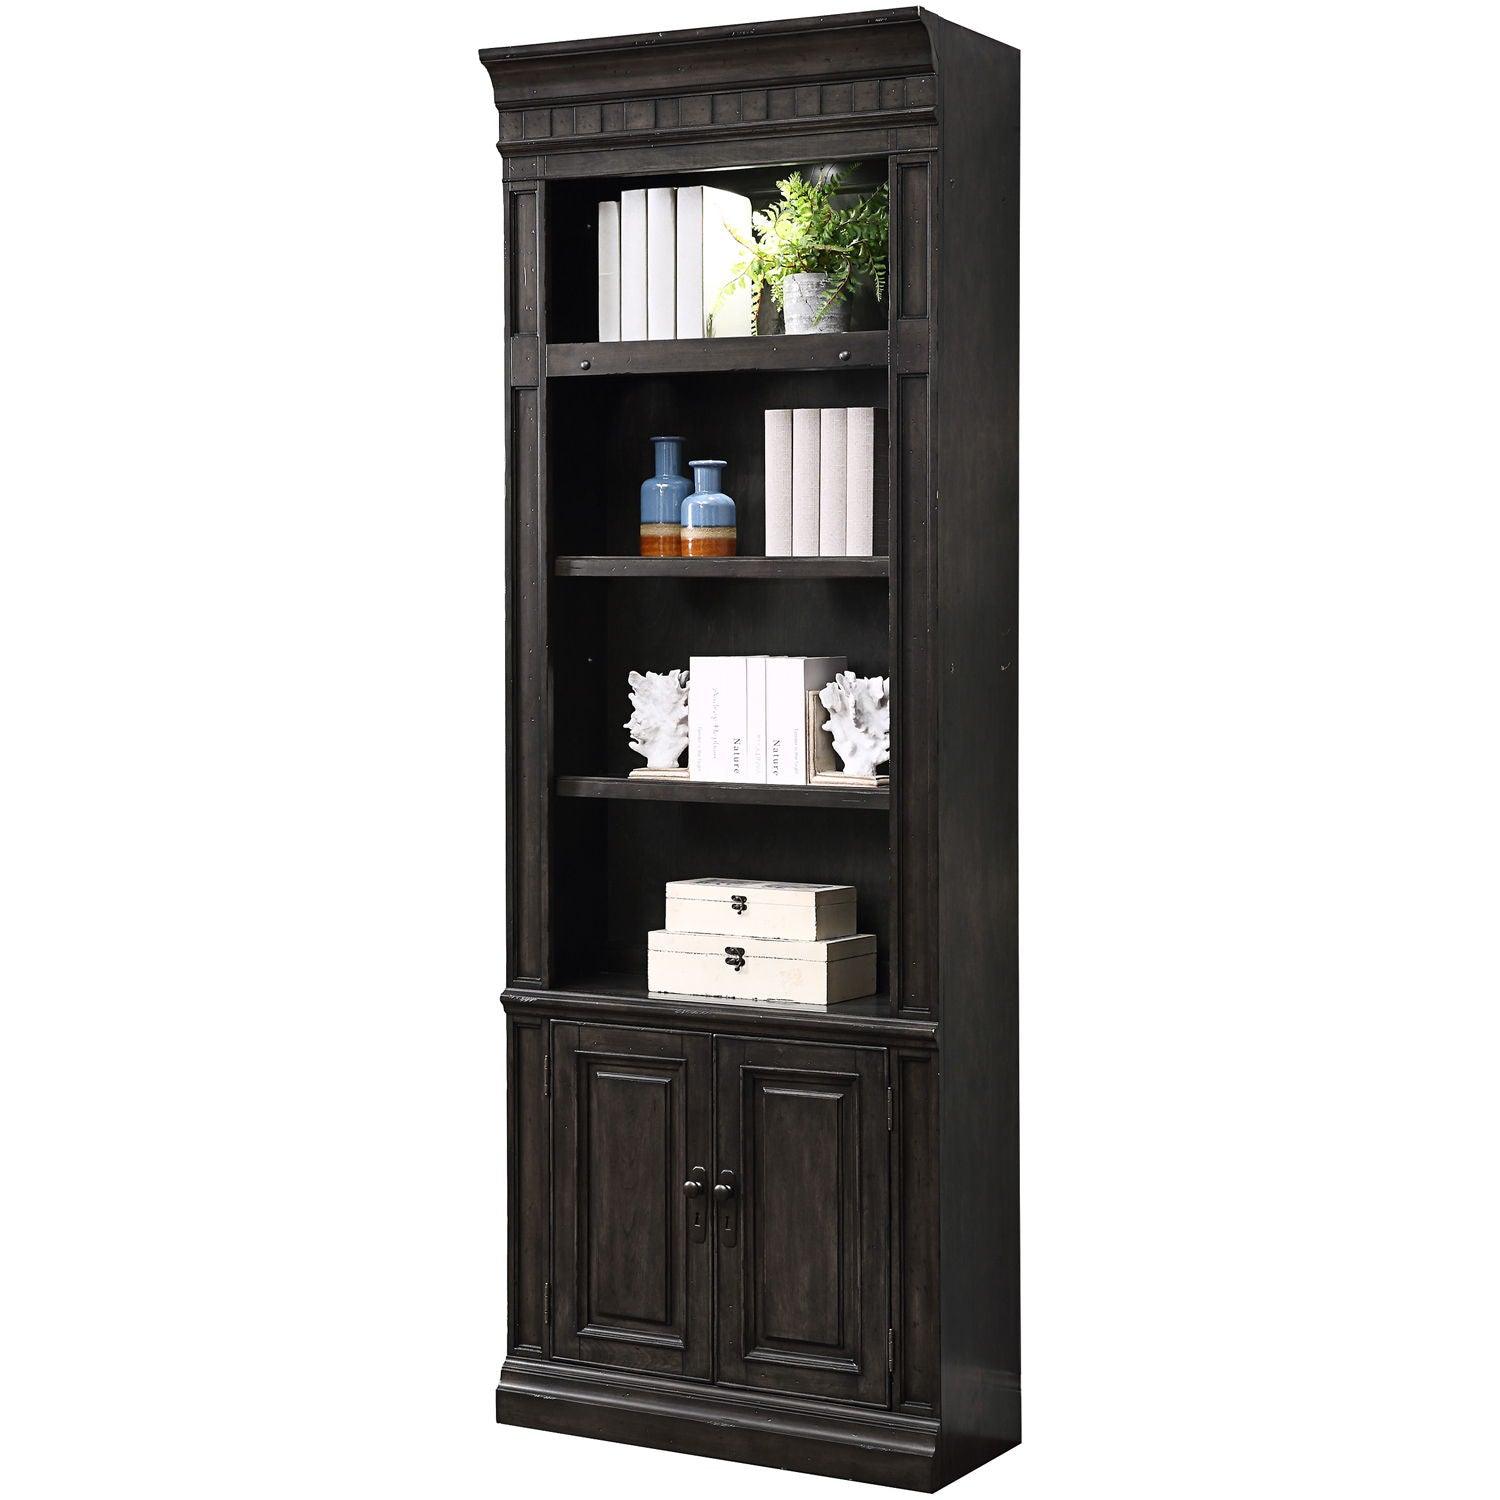 Parker House - Washington Heights - Open Top Bookcase (32") - Washed Charcoal - 5th Avenue Furniture